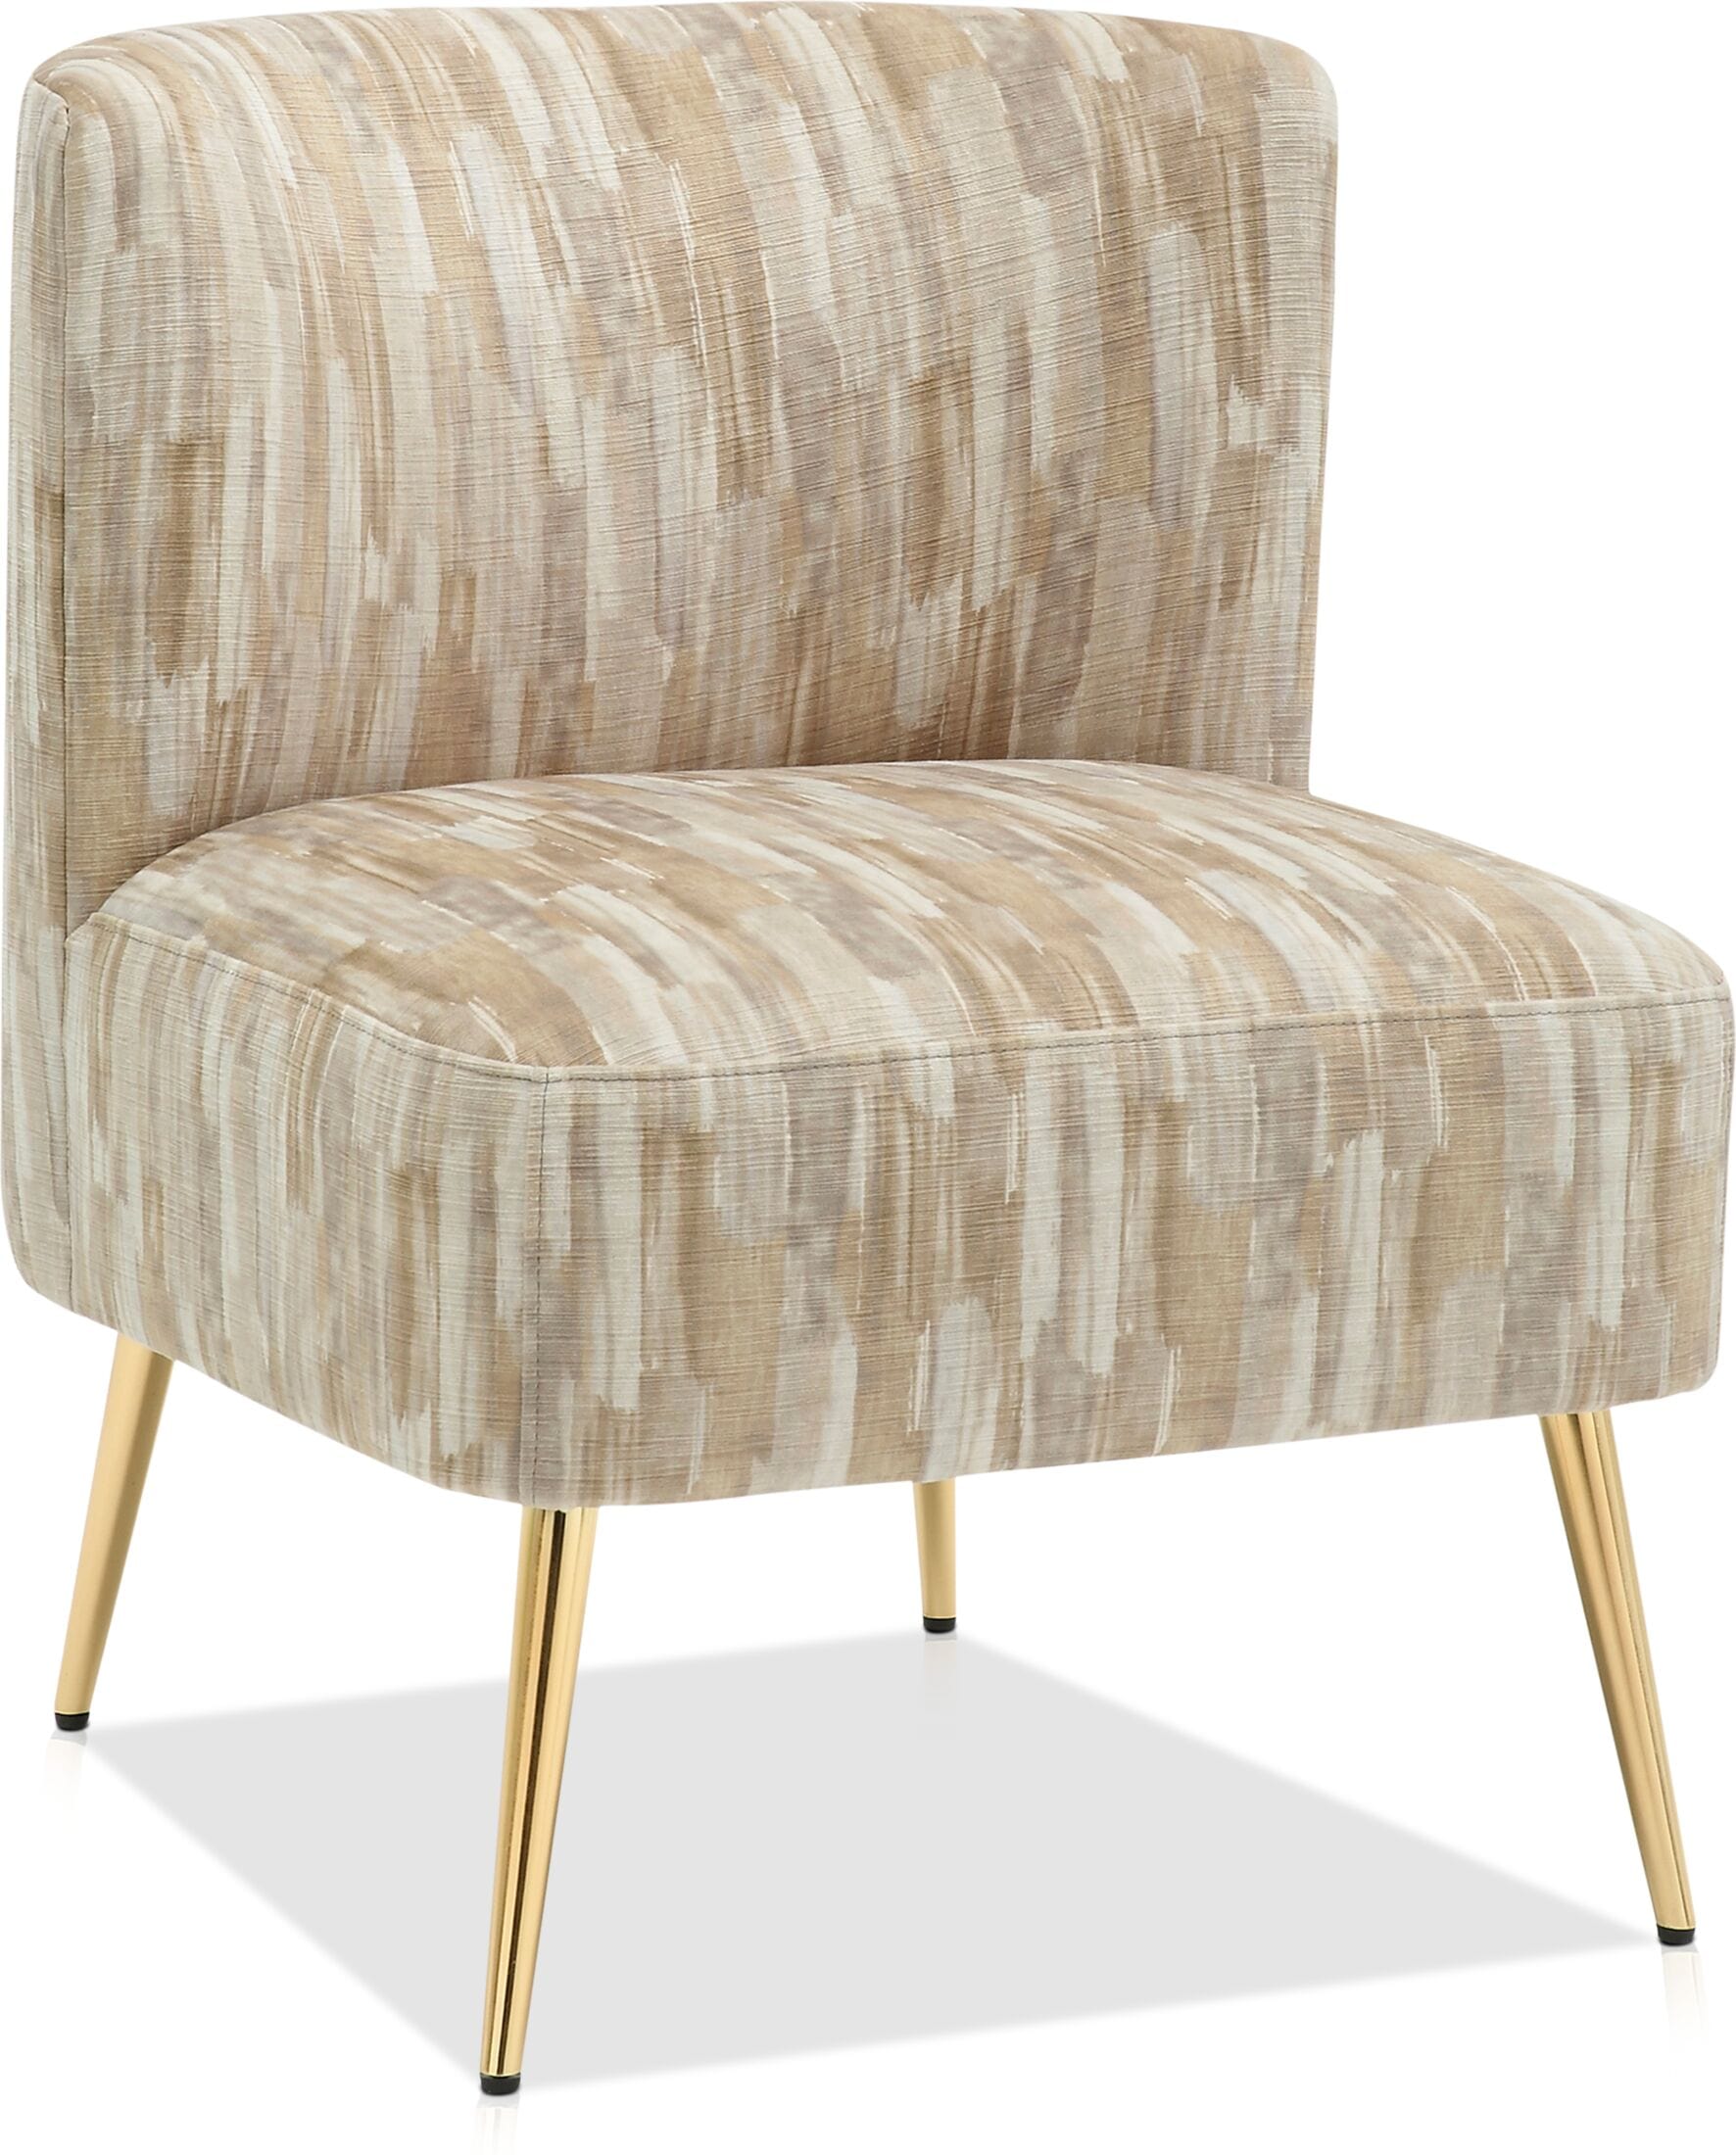 Hermione Light Brown Accent Chair 2800624 828867 